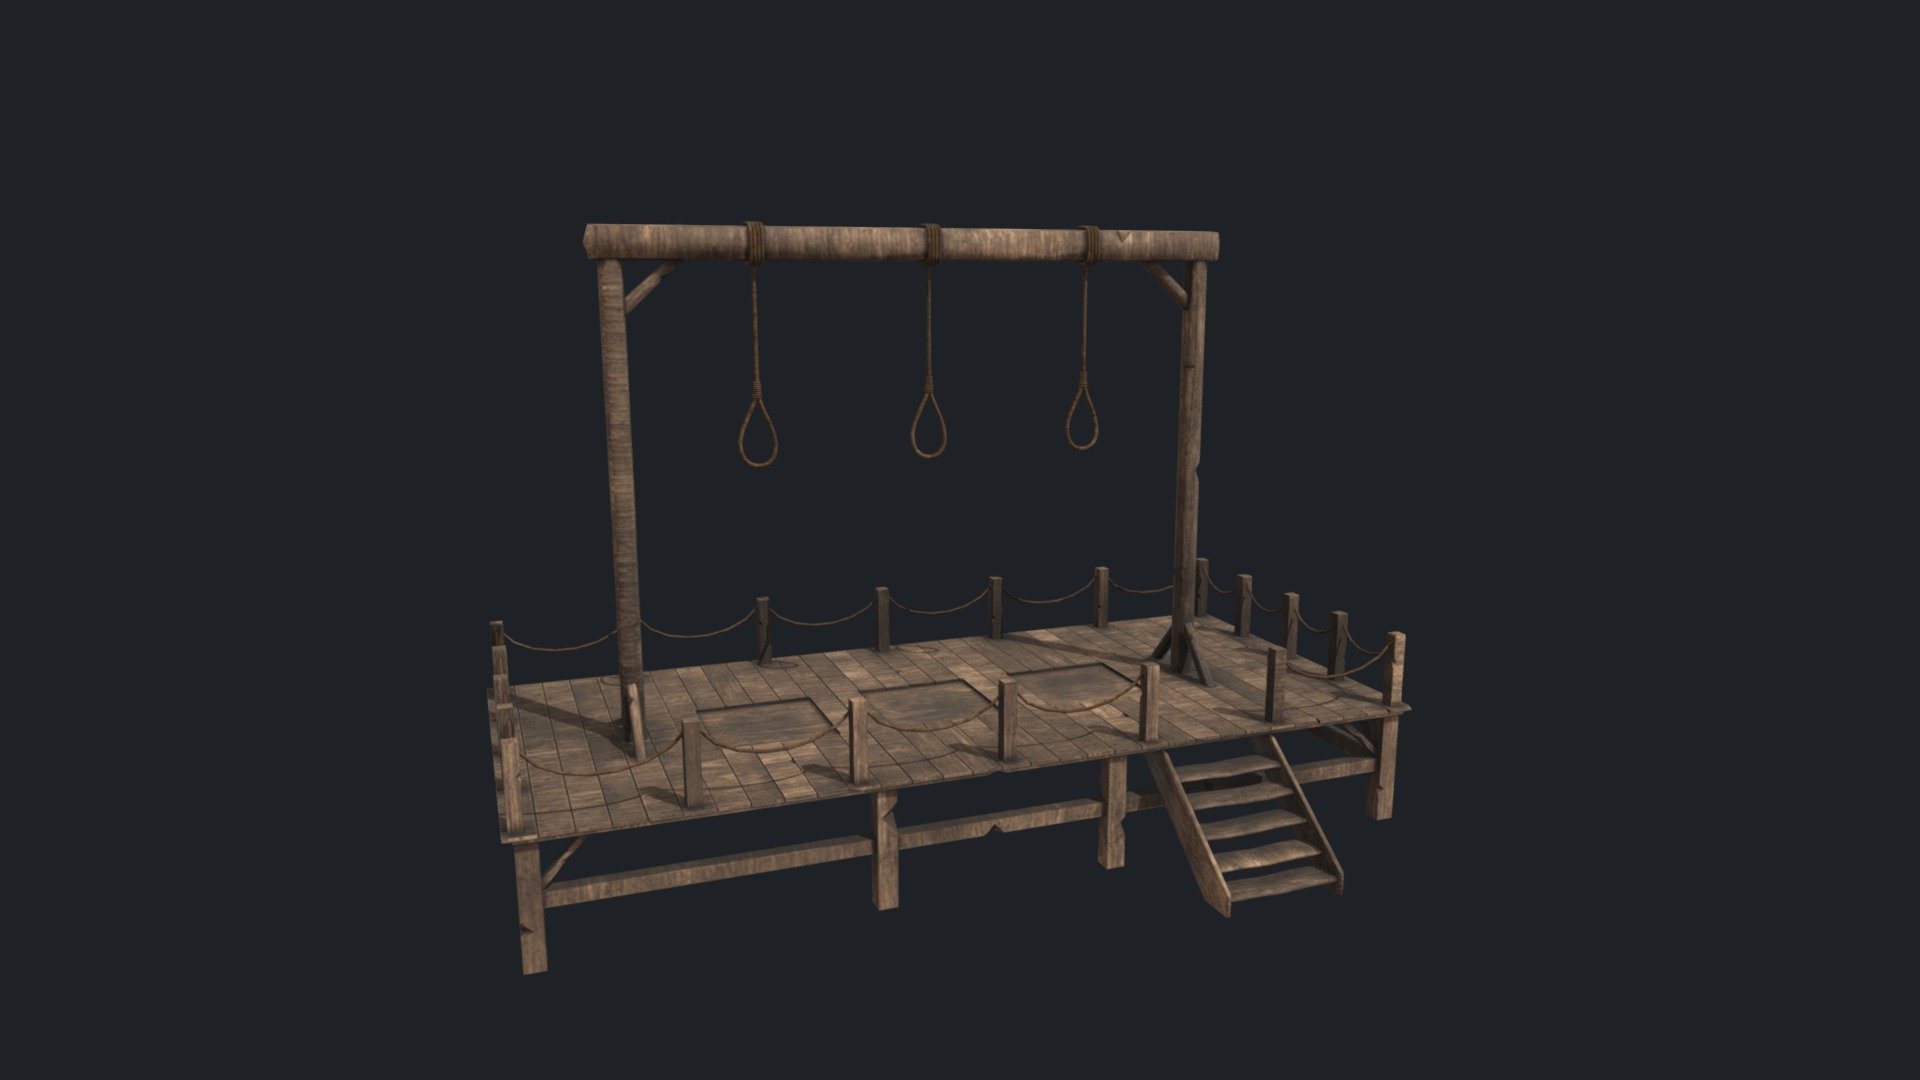 This gallow model created and shared by sharetextures.com You can download it from our website for free and up to 4K resolution. Our free models are CC0, you can use it anywhere you want without any license restriction 3d model